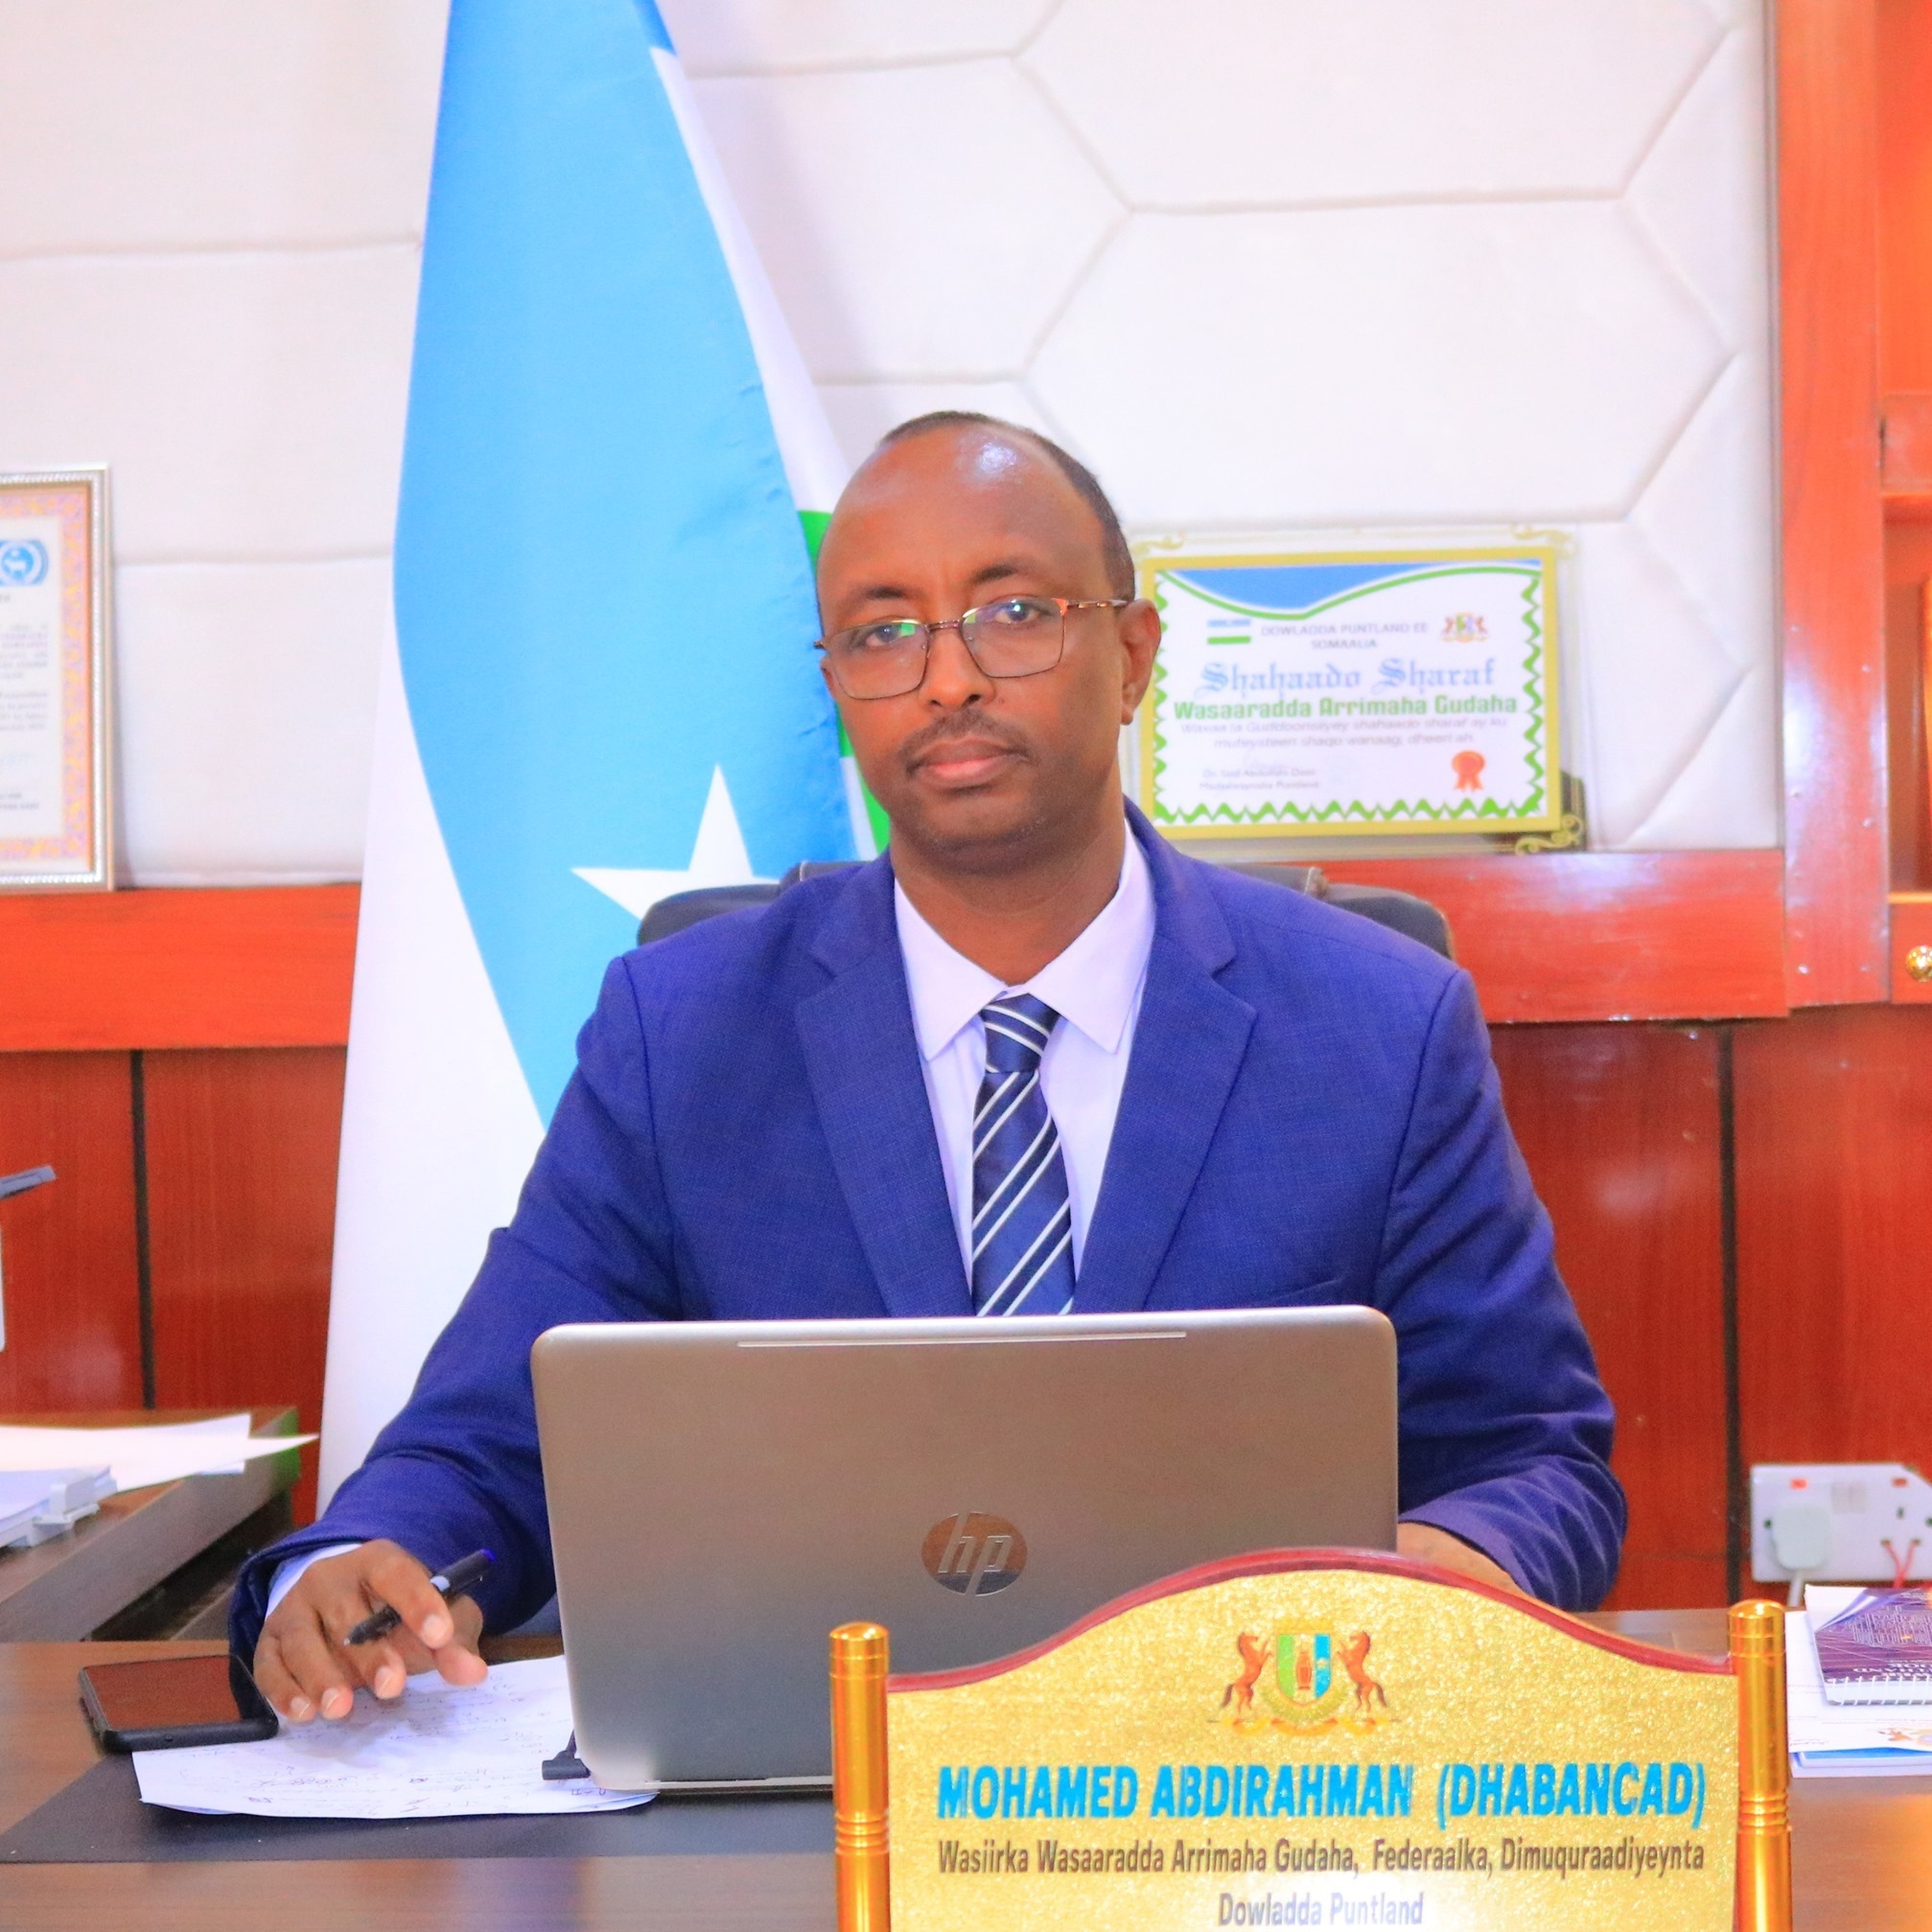 Puntland must protect independent media from undue interference, says NUSOJ